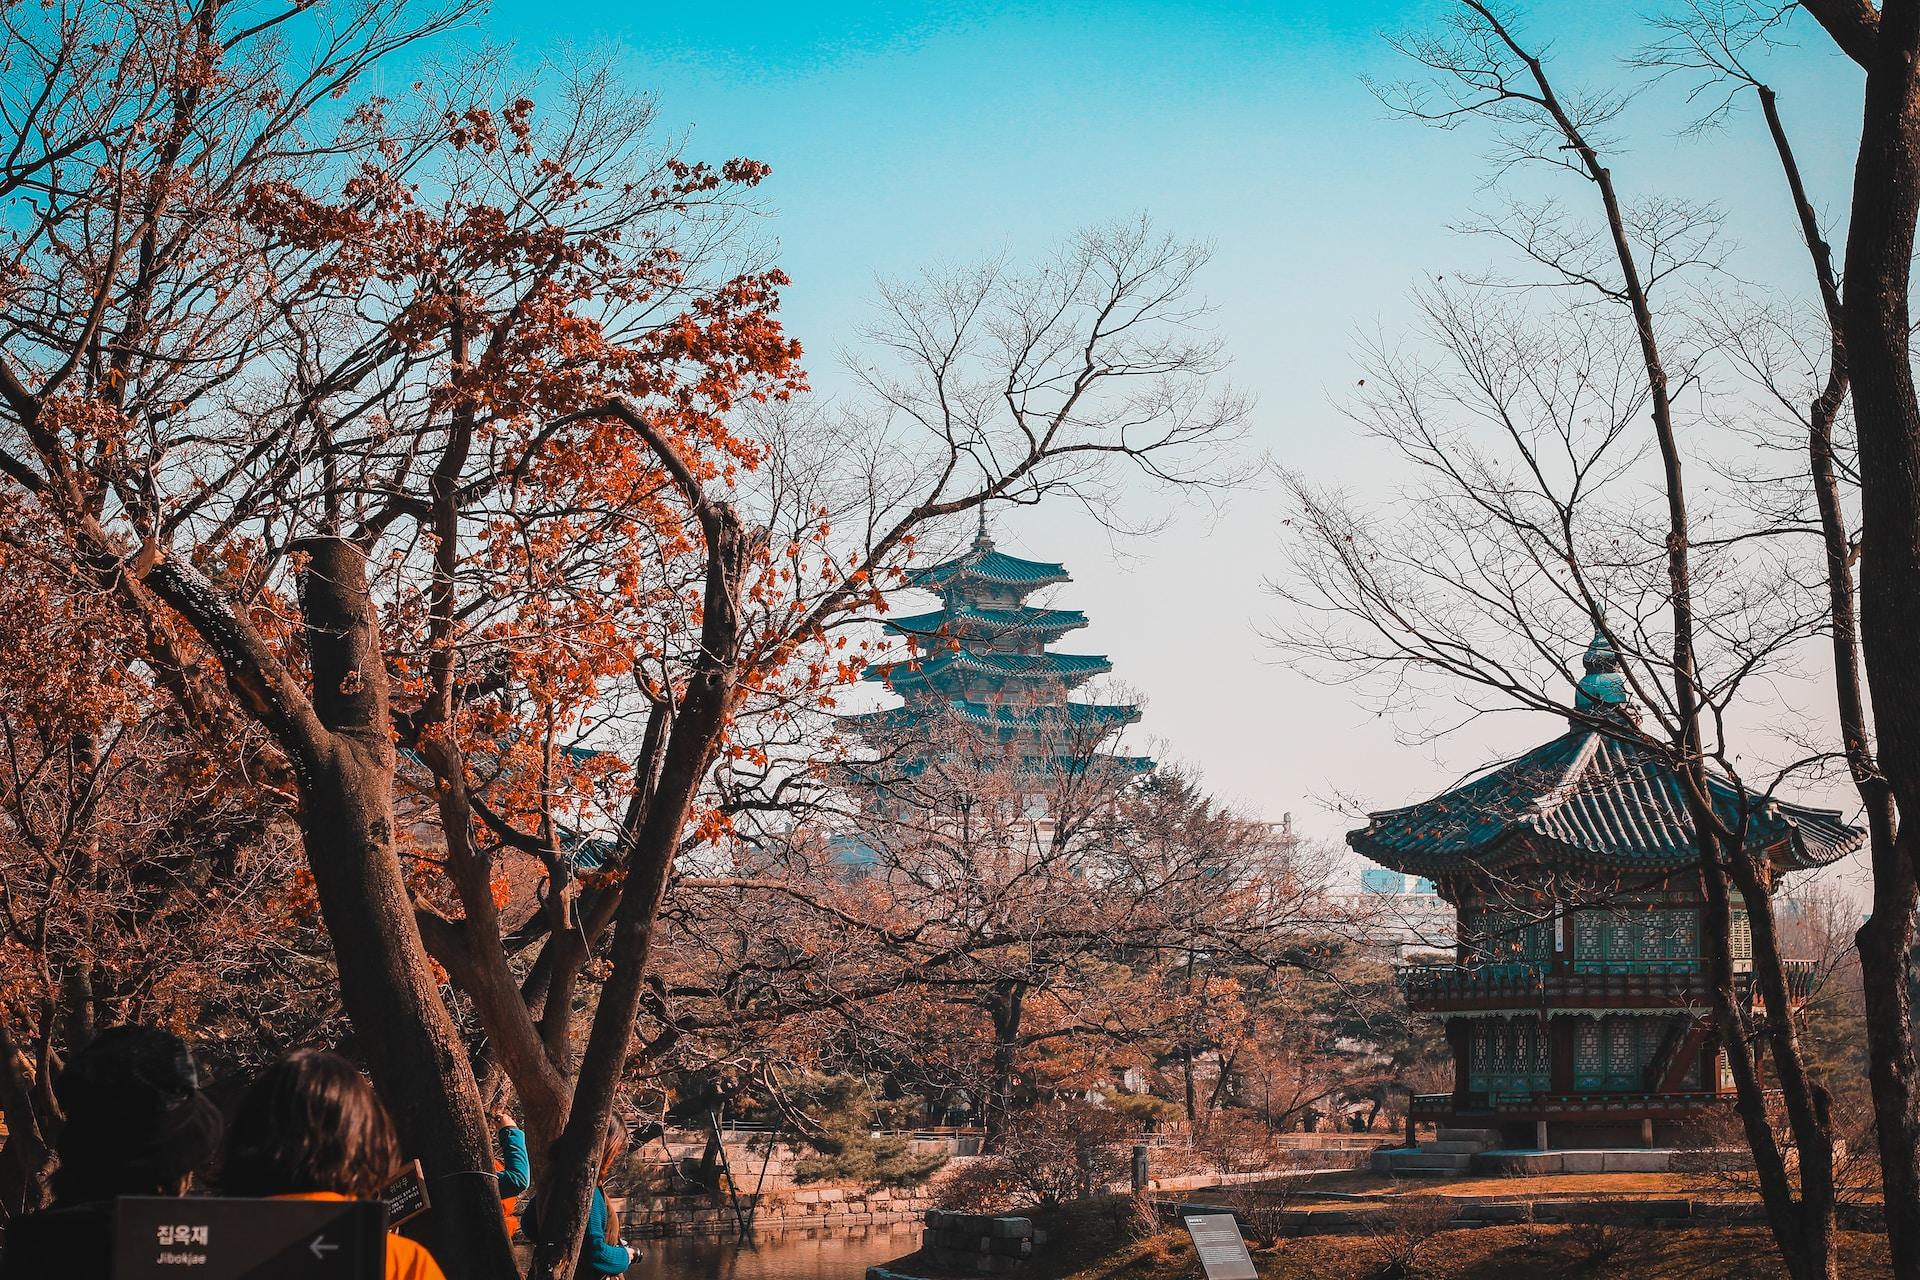 Soth Korea: two temples in park